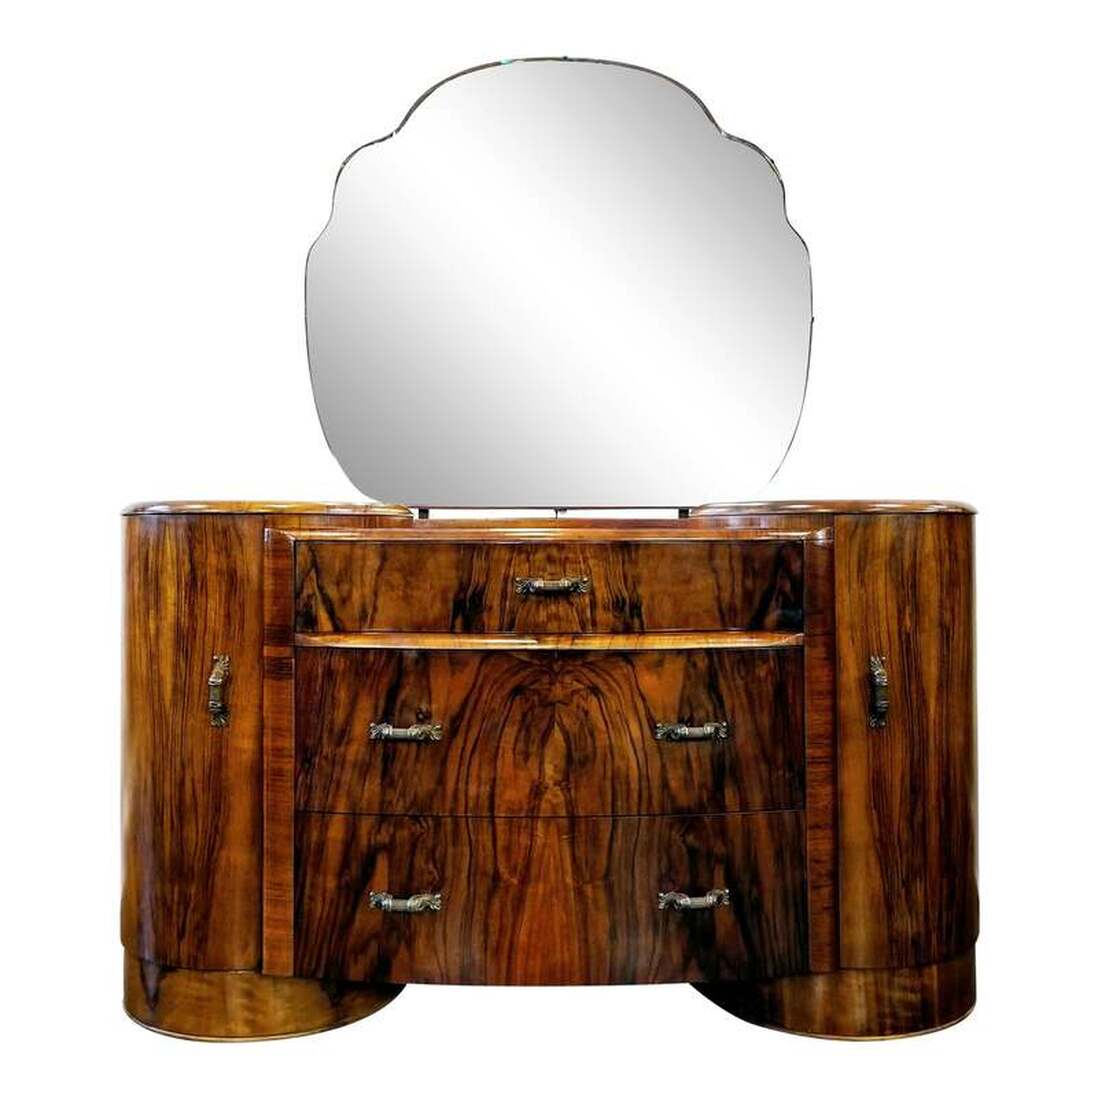 Vintage Art Deco style burl walnut vanity with shaped, tilting mirror manufactured by Shrager Brothers Masterpiece Furniture on Bridport Road in Edmonton, London, England.  Vanity has three center storage drawers with stylized Neoclassical column and acanthus leaf pulls. Each rounded side has a storage cabinet with shelves built out from the inside of the doors.  The shaped mirror may be easily tilted by a finger pull at the bottom front of the mirror.  The Masterpiece Furniture label on the back lists this vanity as serial number 7463.  The Shrager Furniture medallion is inside the right side door.  Measurements:  51